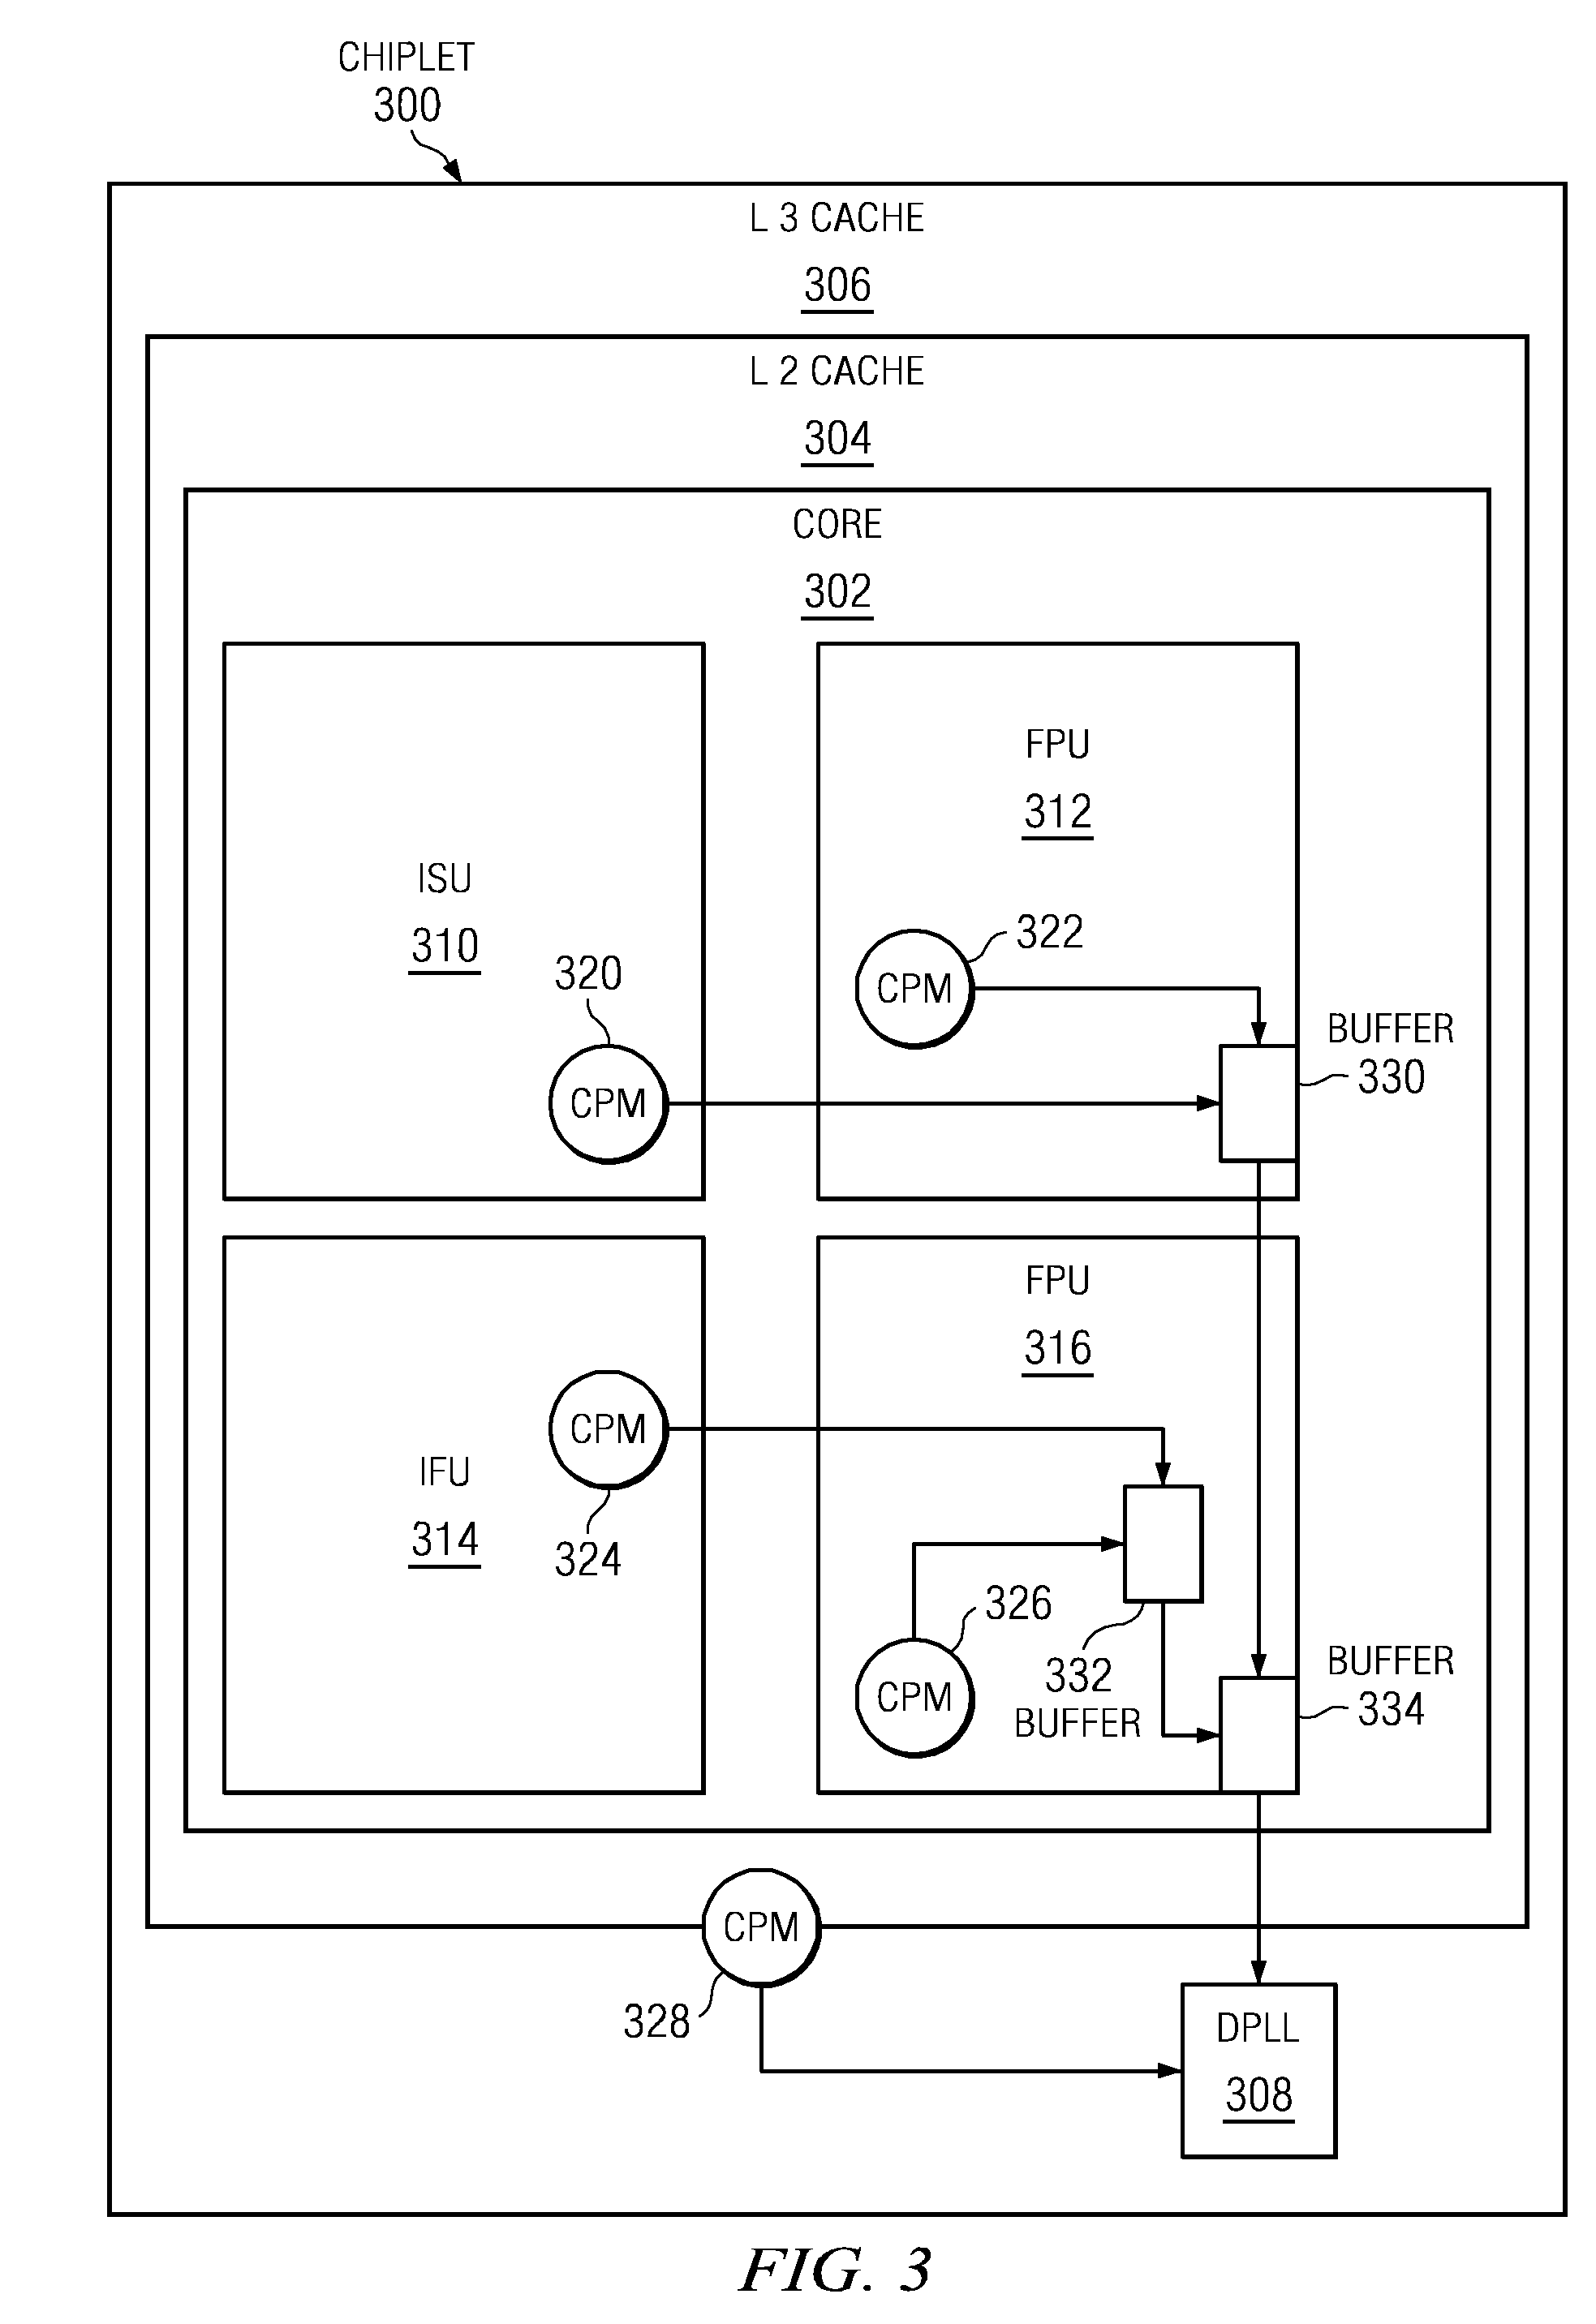 Self-learning of the optimal power or performance operating point of a computer chip based on instantaneous feedback of present operating environment